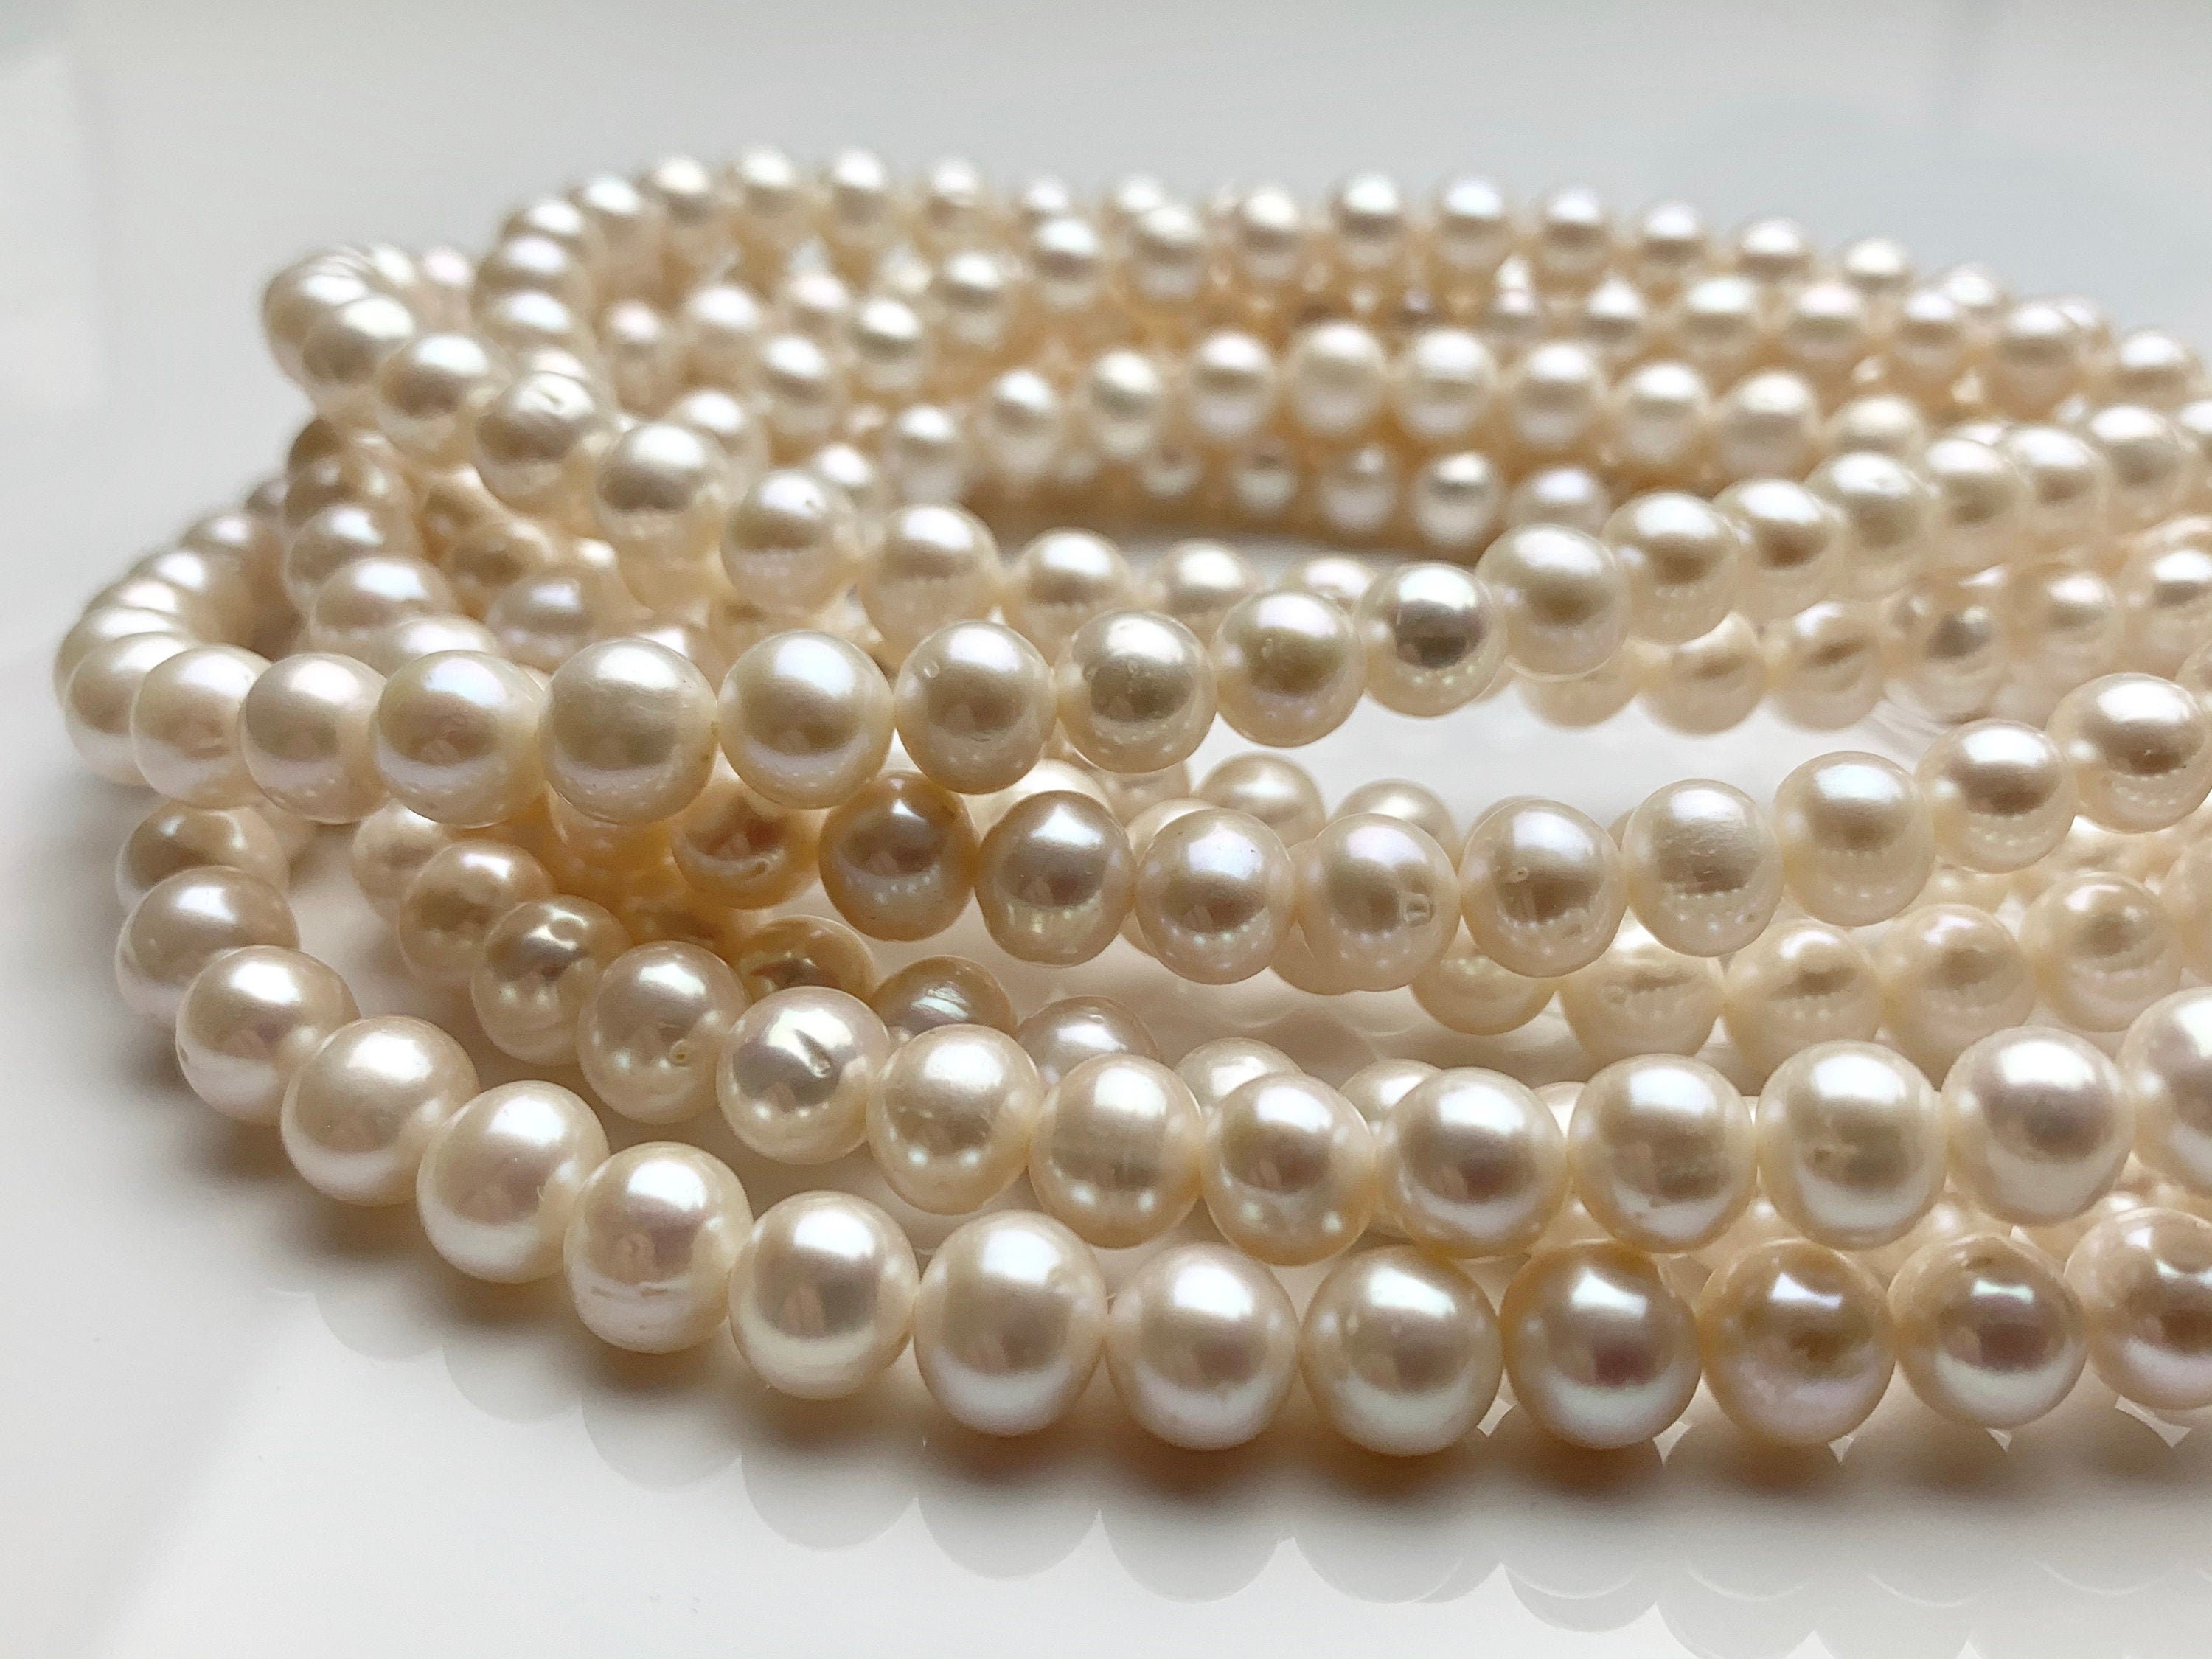  Eswala Pearls Beads for Jewelry Making 100pcs 8-9mm